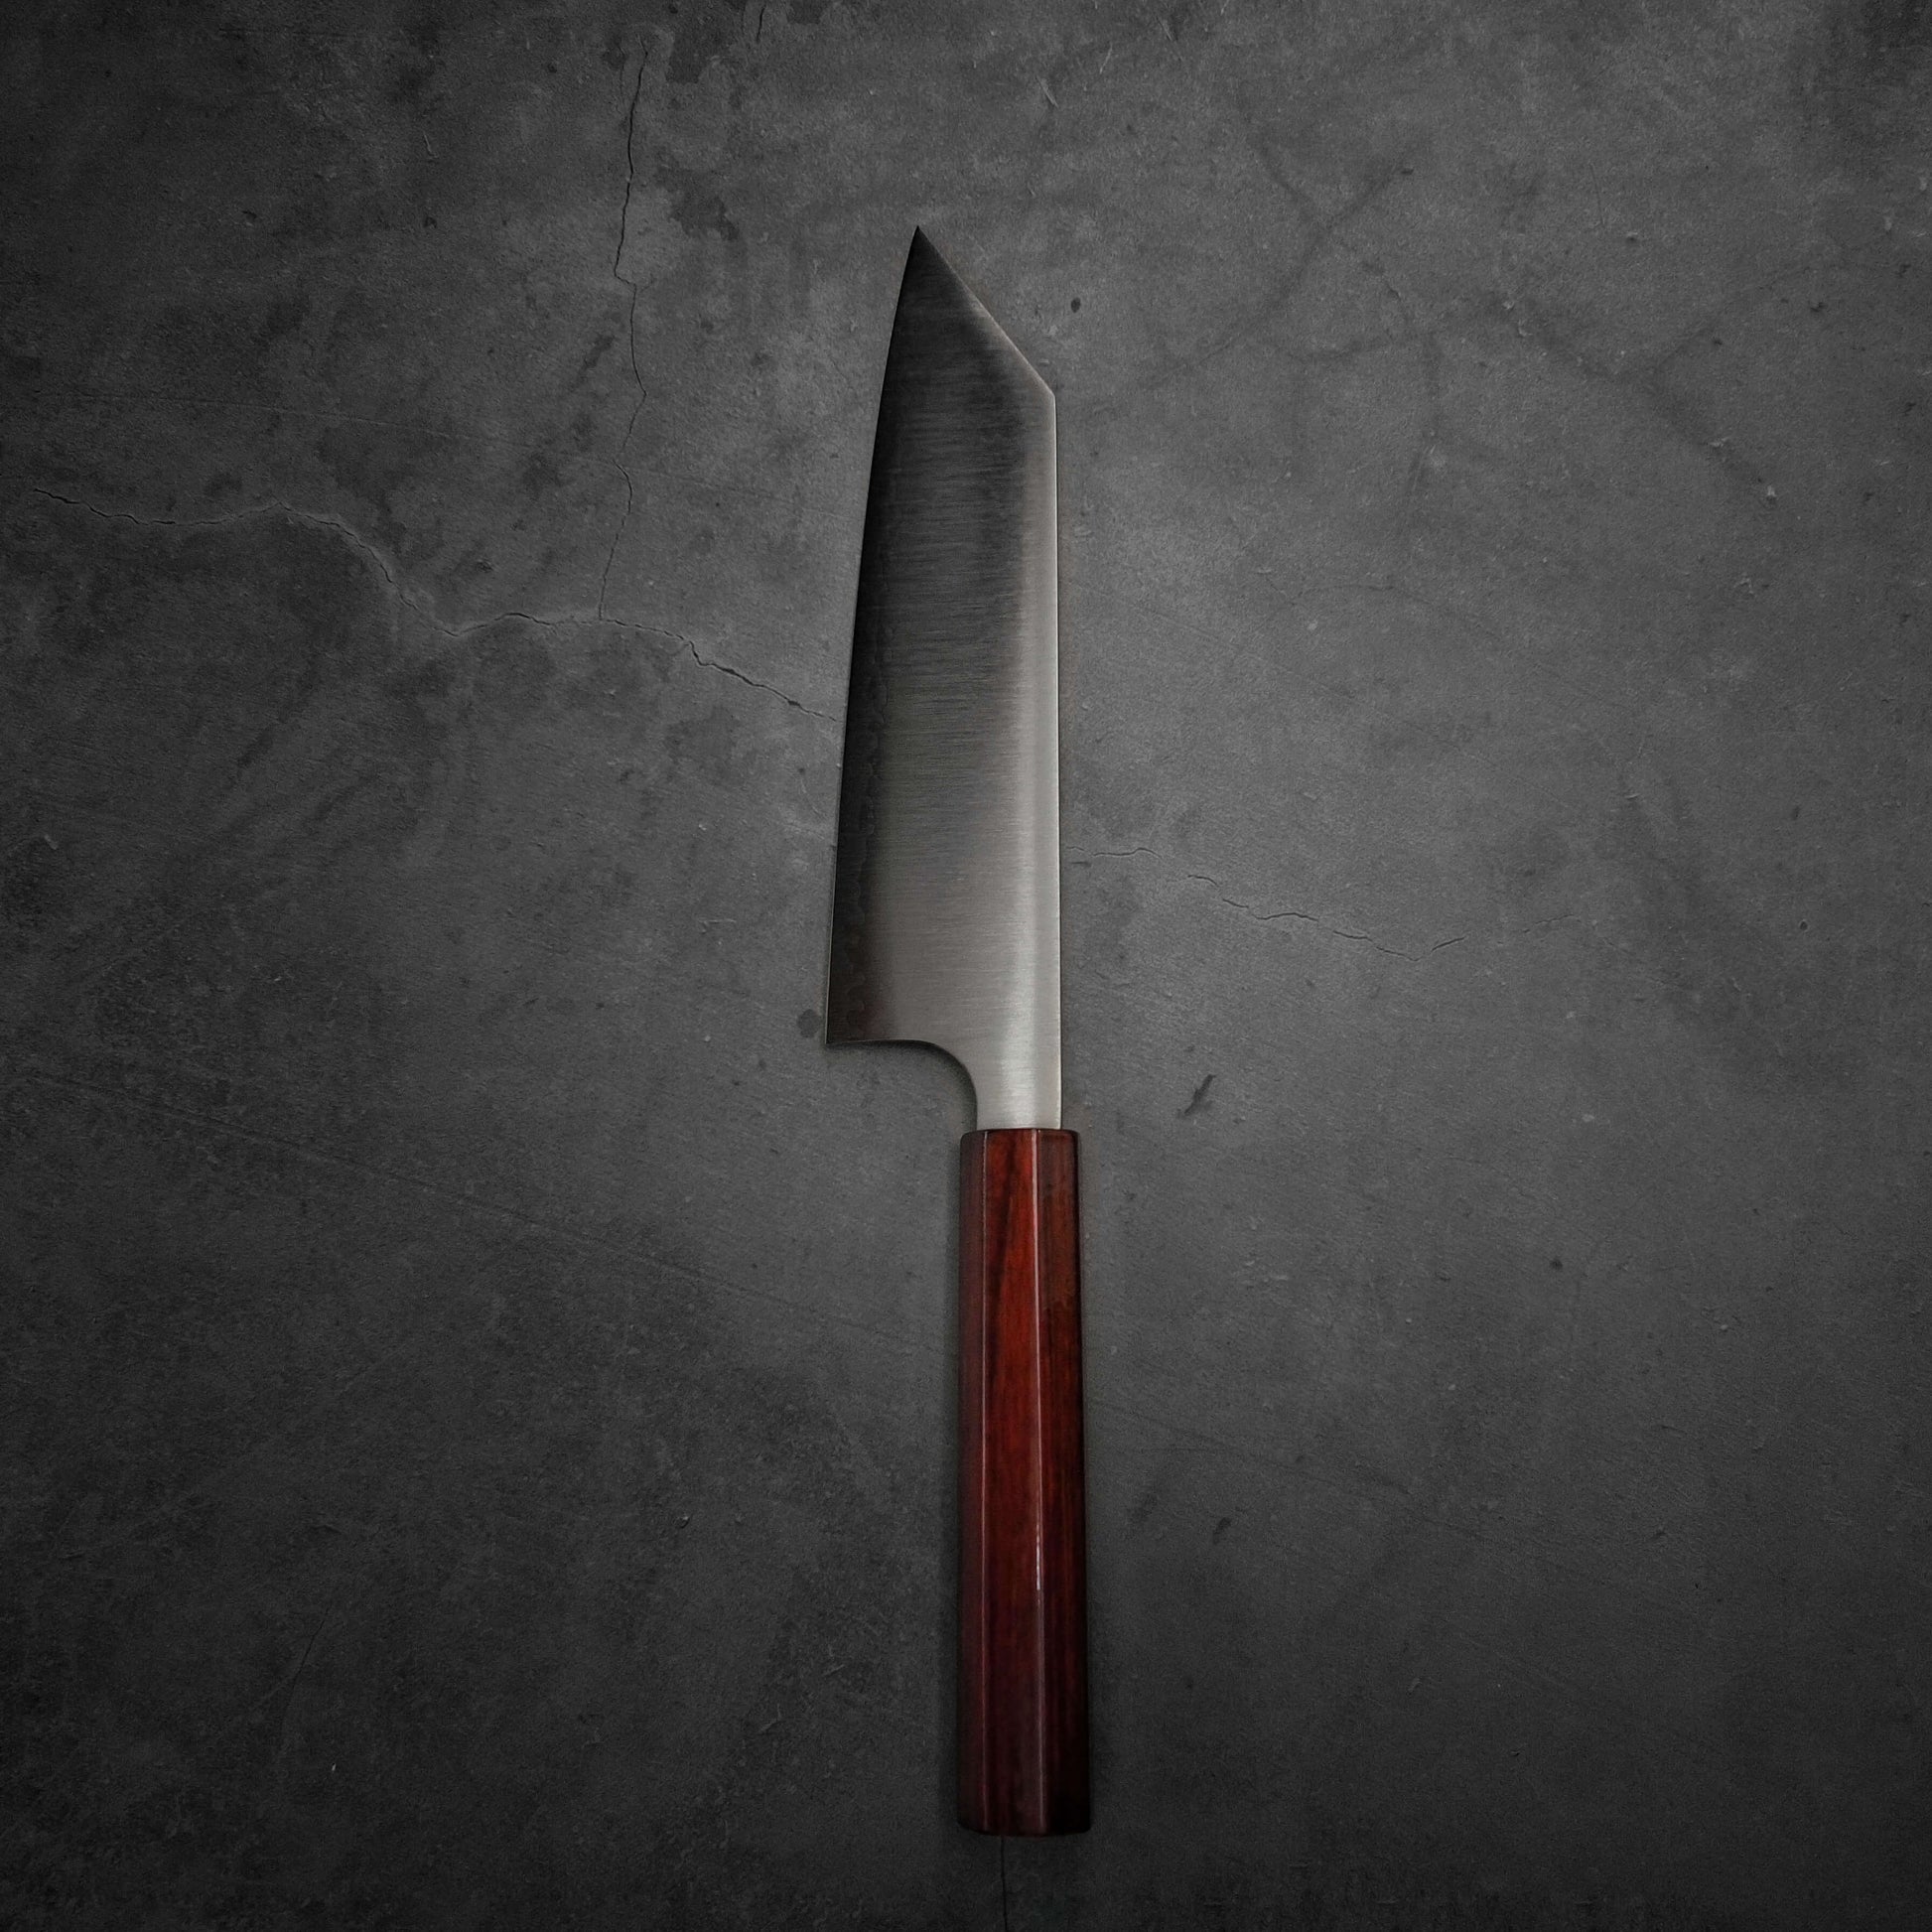 Top view of Kei Kobayashi SG2 bunka. Image shows left side of the knife in vertical position